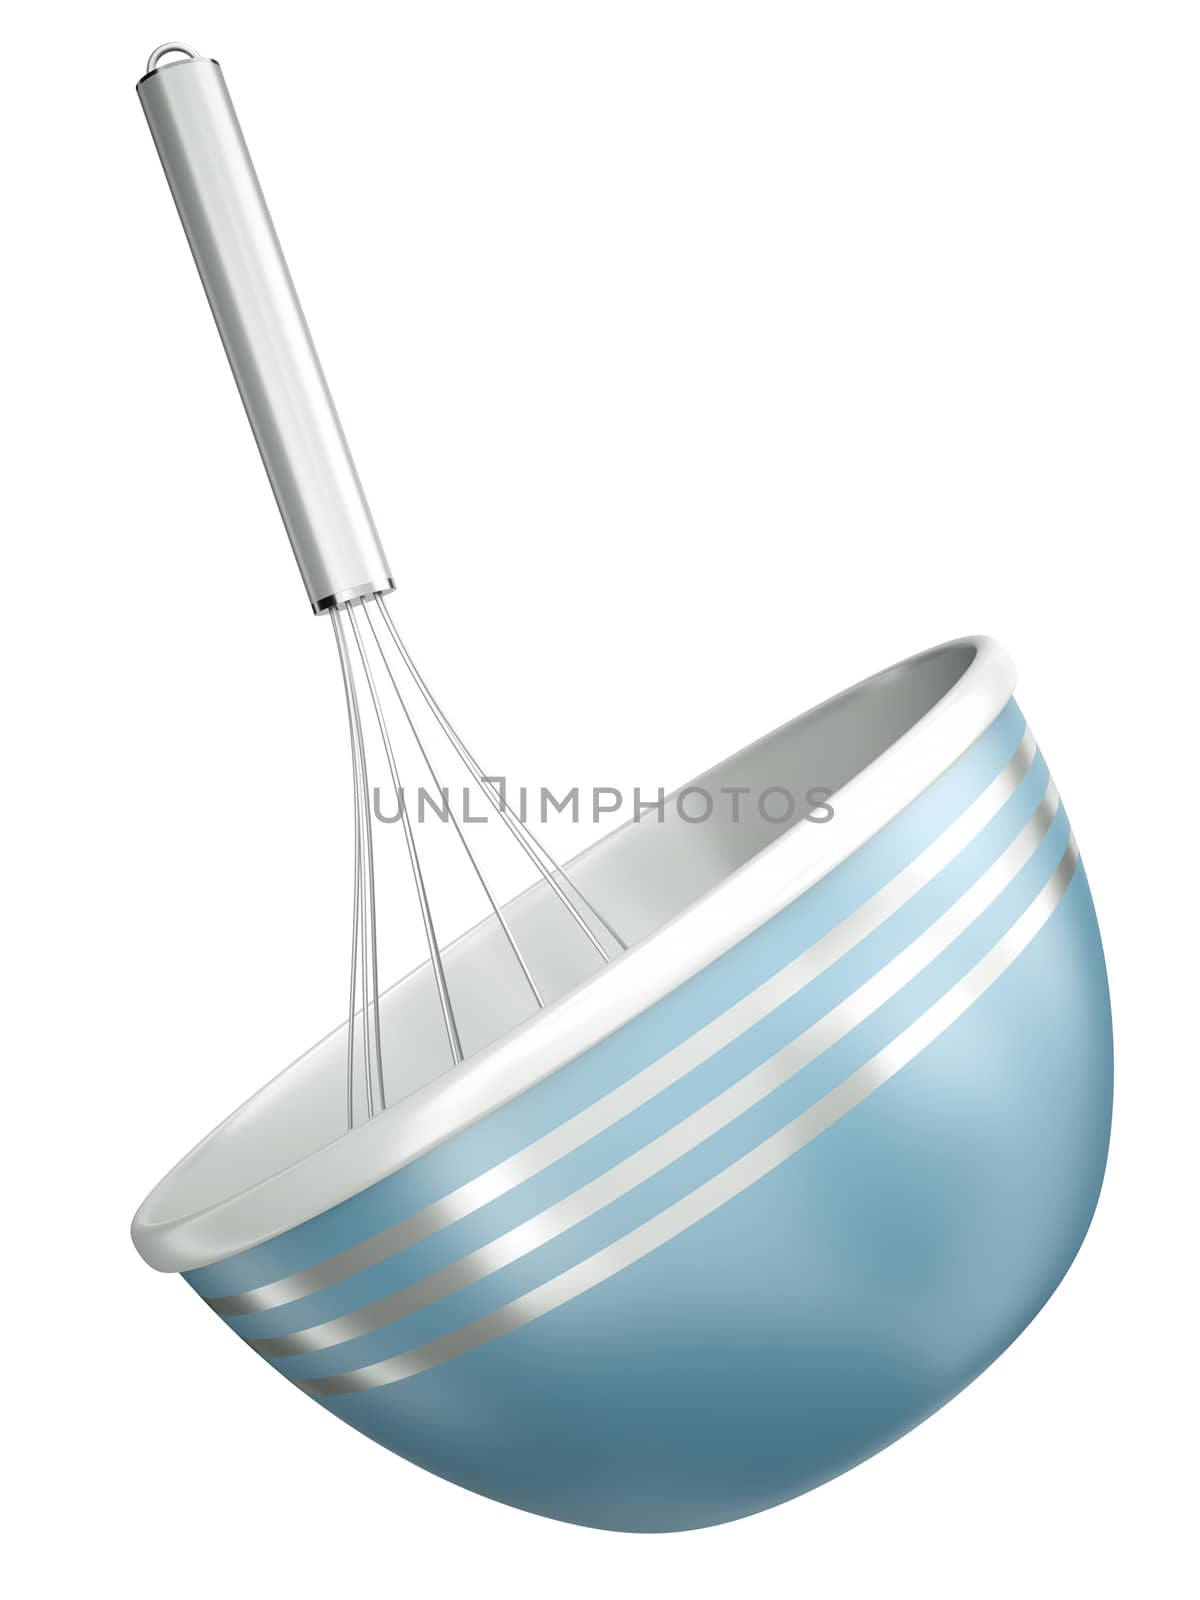 Blue bowl with a wire whisk isolated on a white background. 3D render.